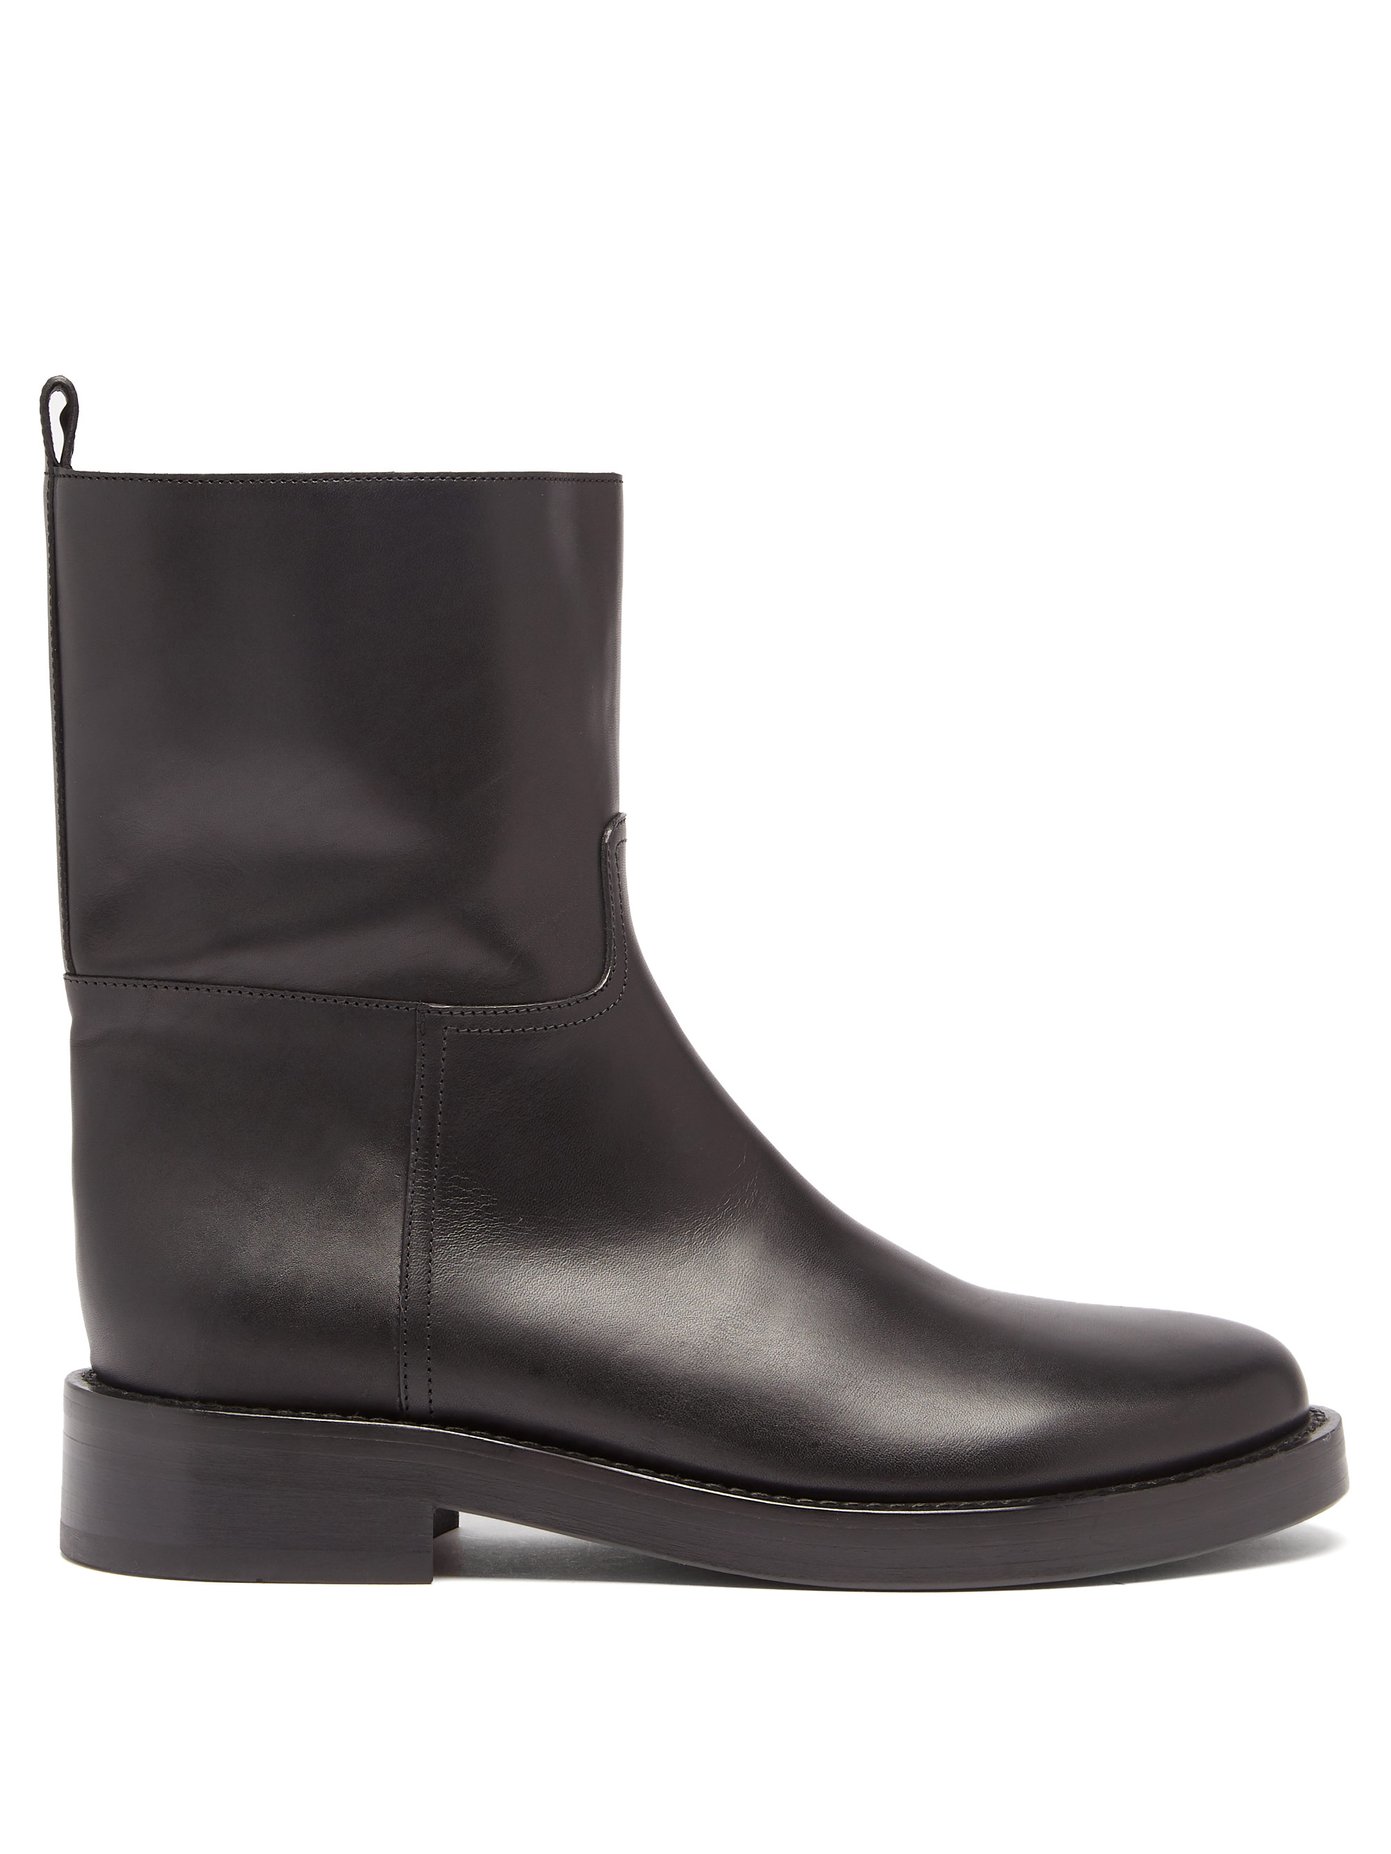 Panelled leather boots | Ann 